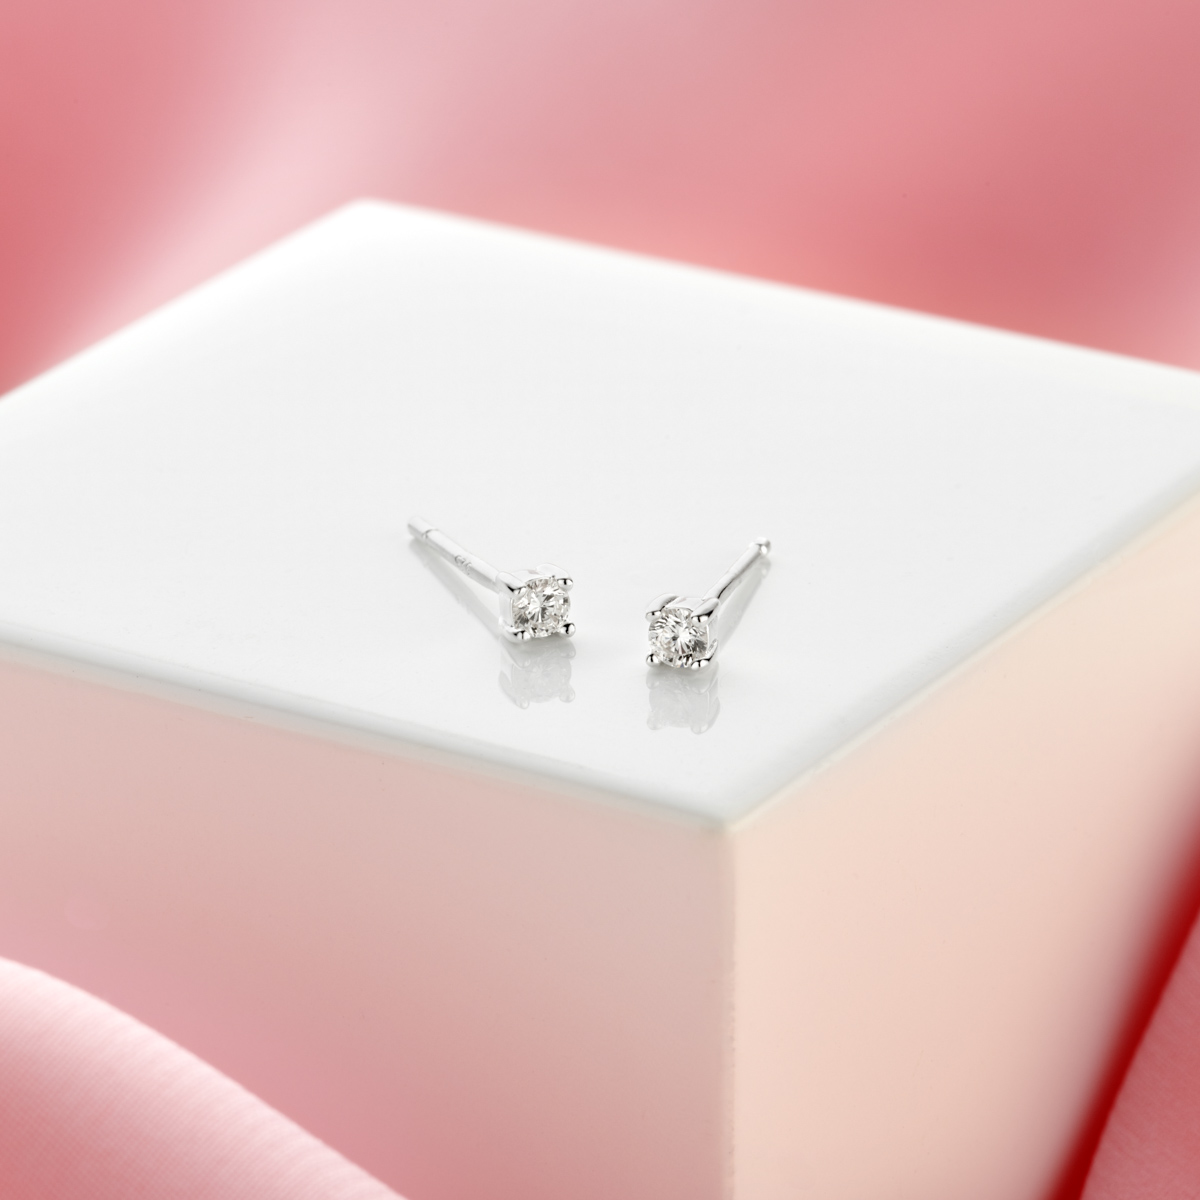 Why Choose Diamond Jewelry for a Baby Girl?